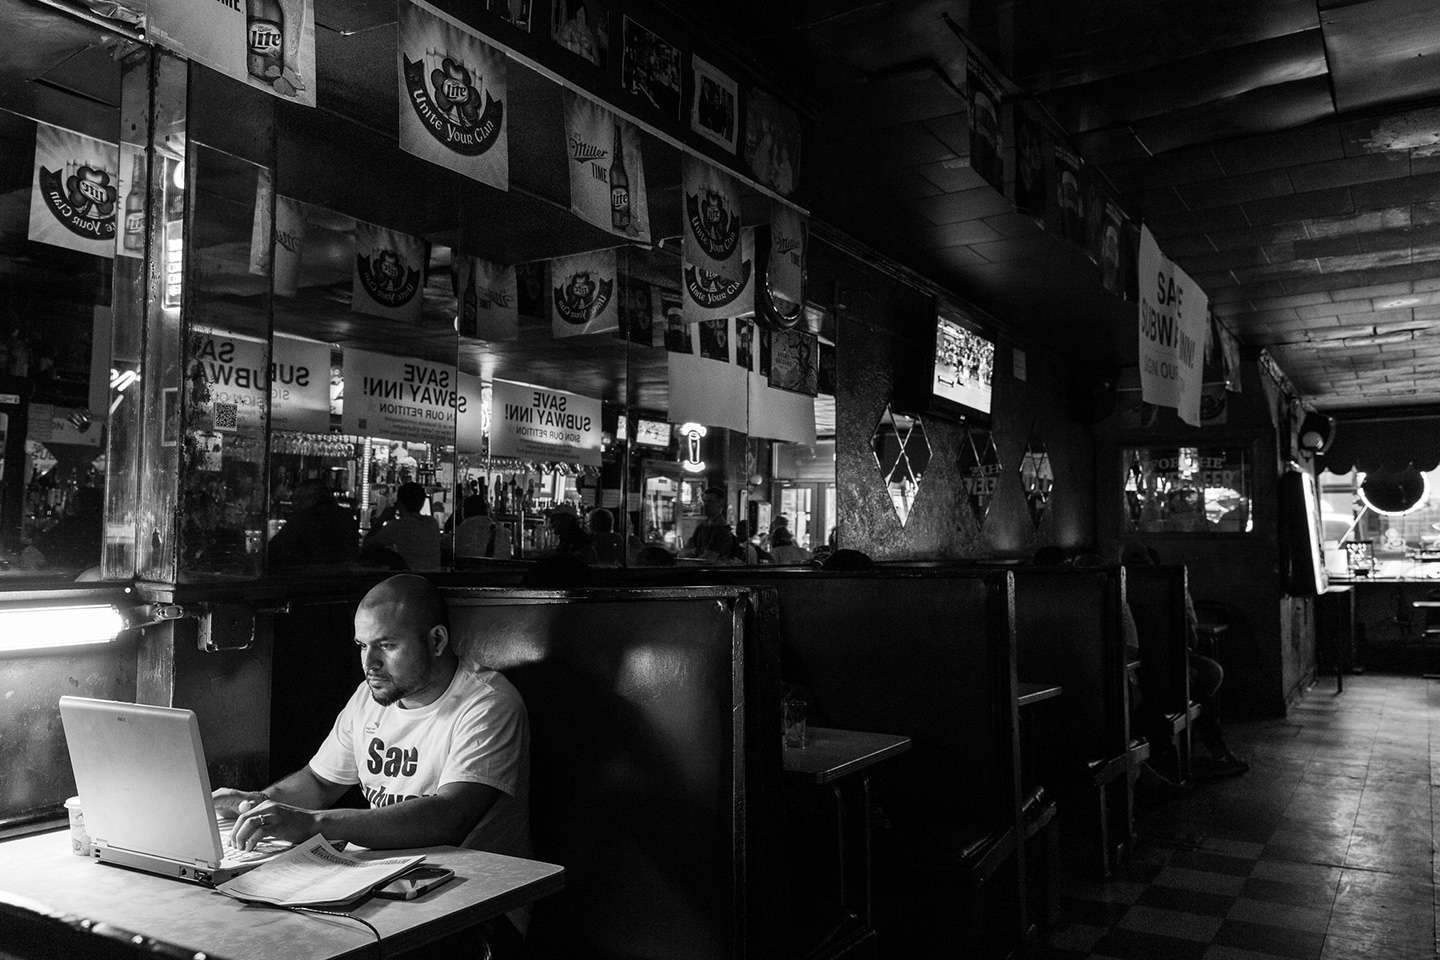 Owner Steve Salinas - Disappearing New York - Subway Bar Inn after 75 years had to move to make room for another luxury high rise apartment building. : Disappearing NY - Subway Bar Inn : New York City portrait photographer